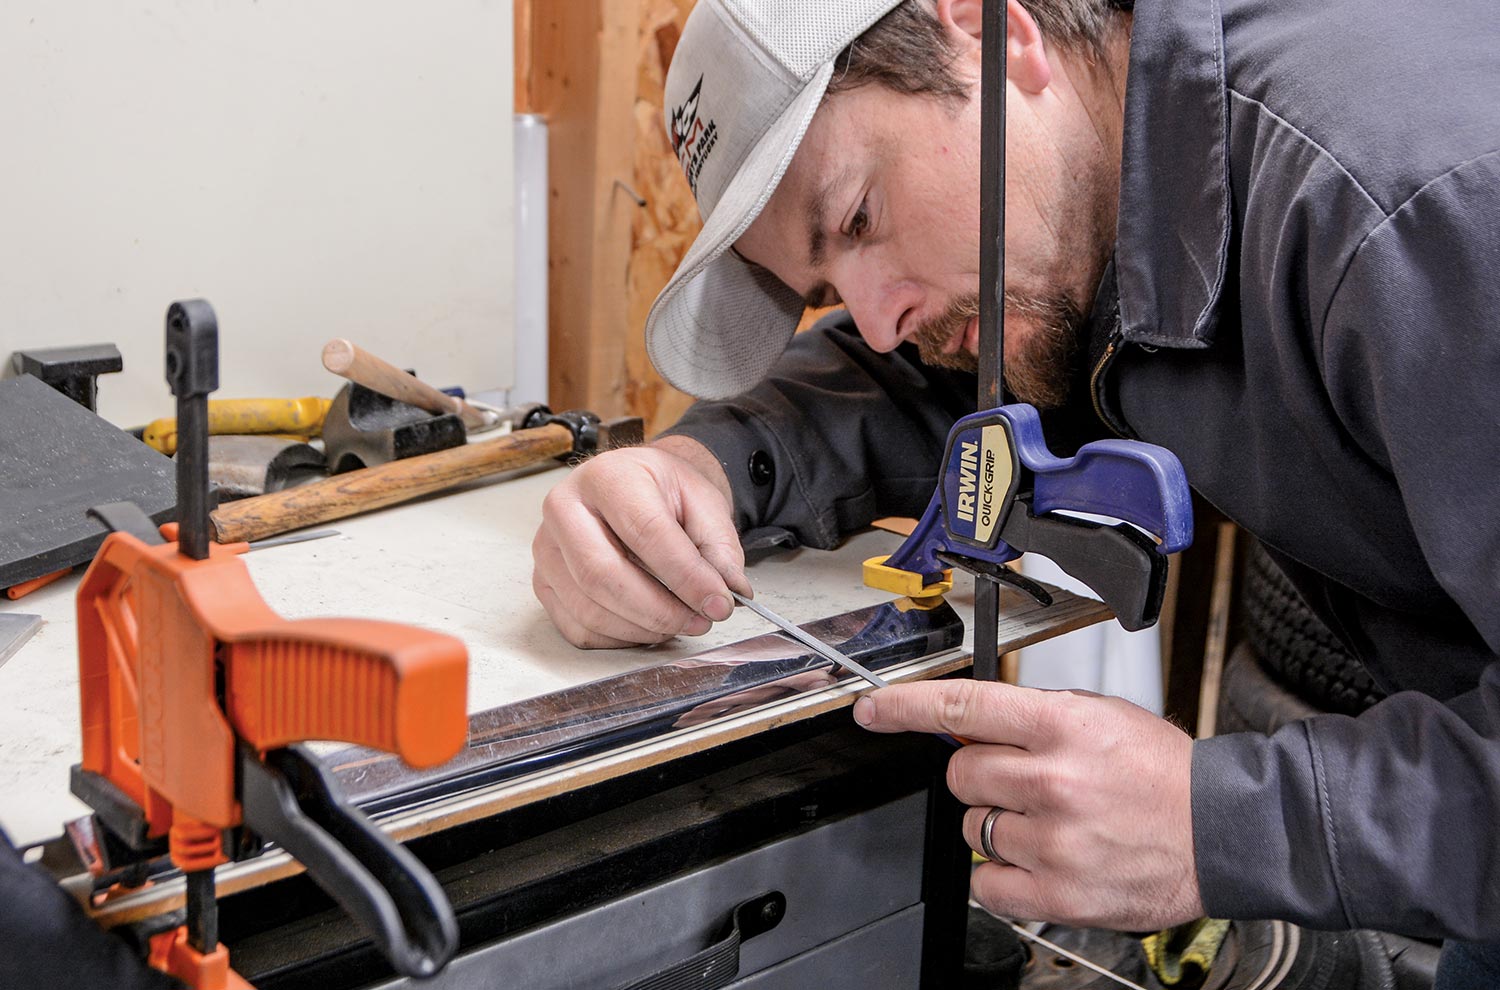 a mechanic uses simple tools on a work table, leaning in close to a piece of steel trim